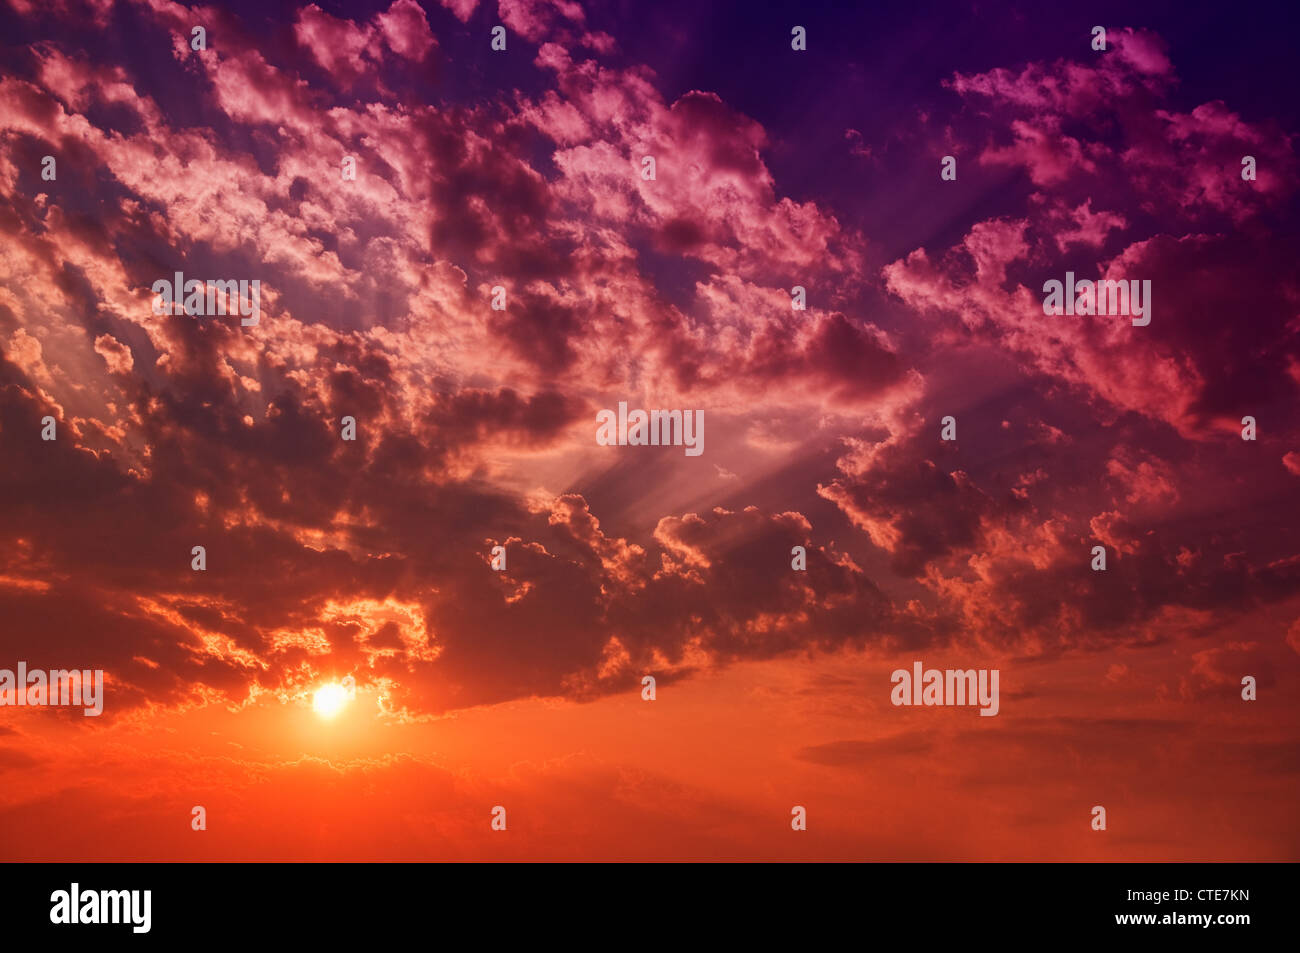 Beautiful red fluffy clouds in dusk. This cloudscape image is suitable as a background for your design. Stock Photo